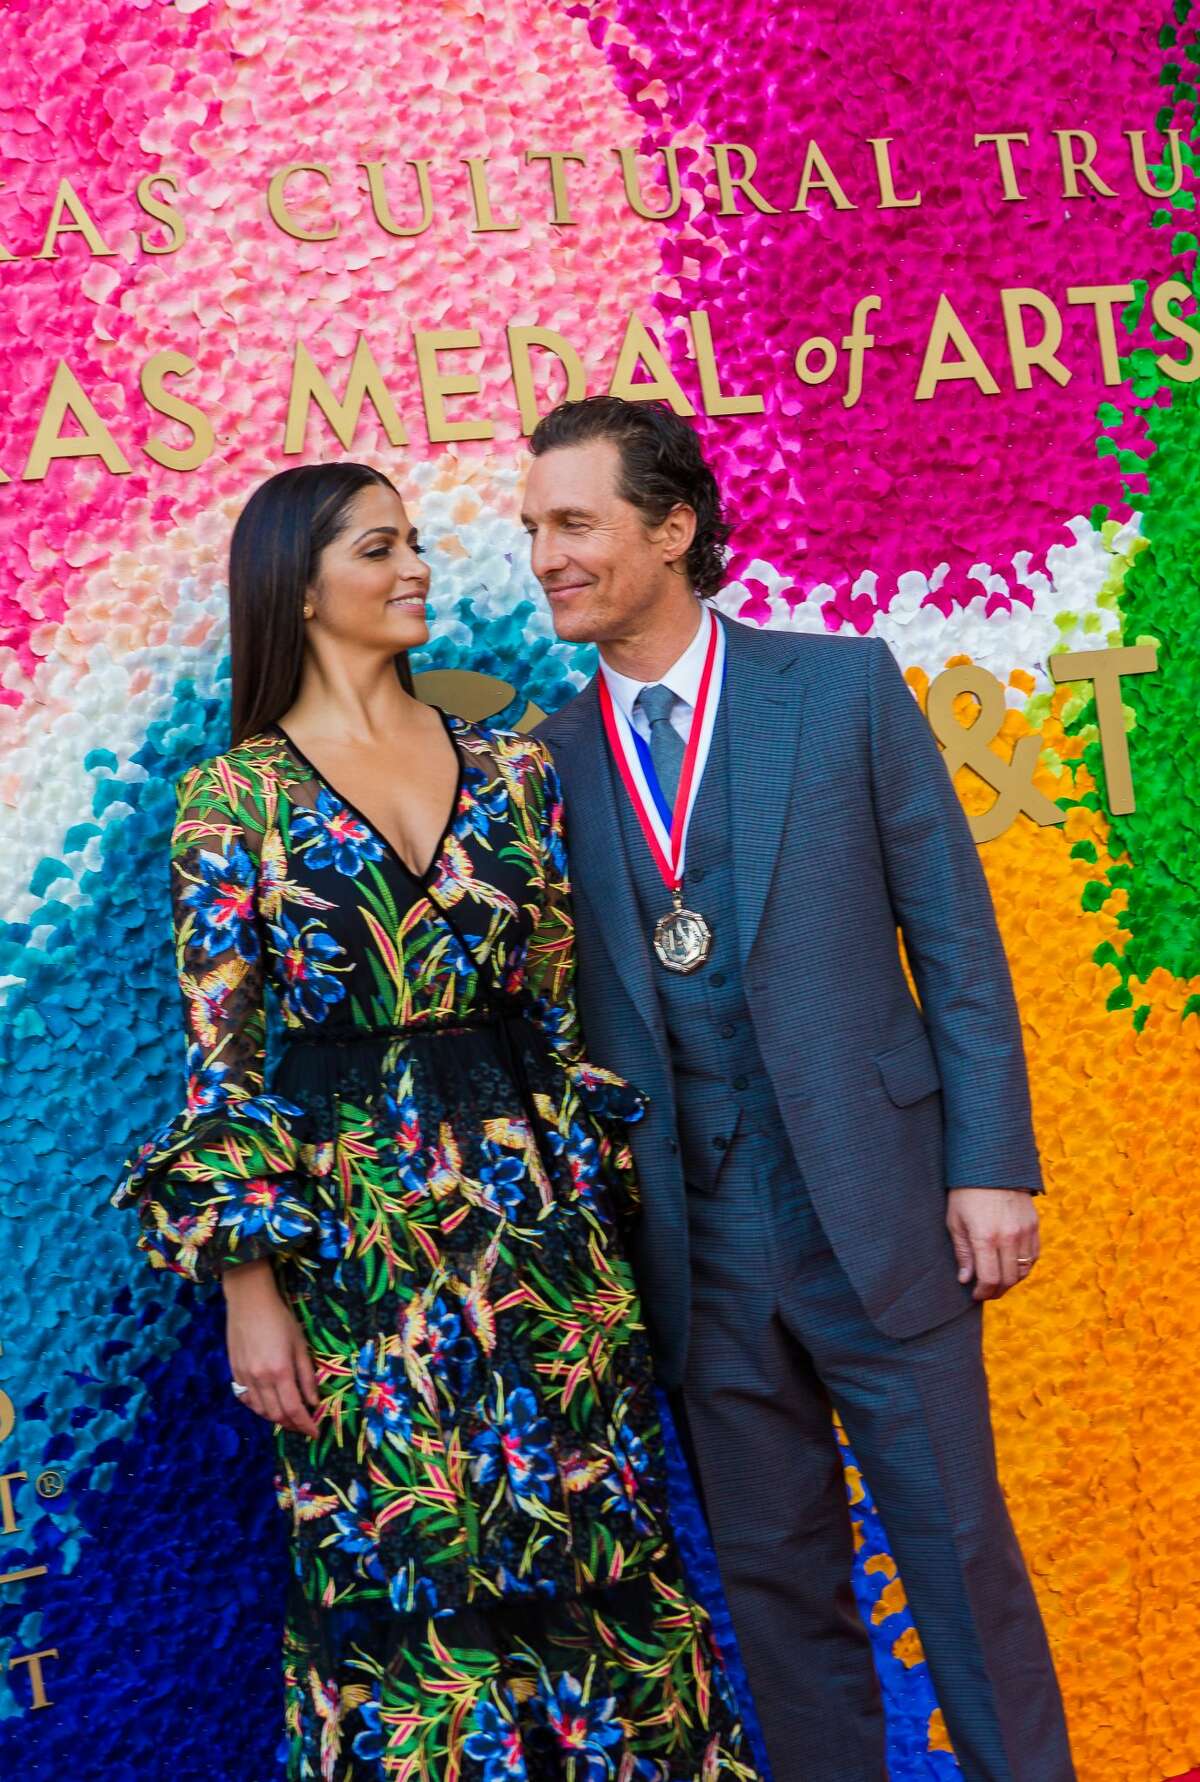 Celebrating legends at the Texas Medal of Arts Awards